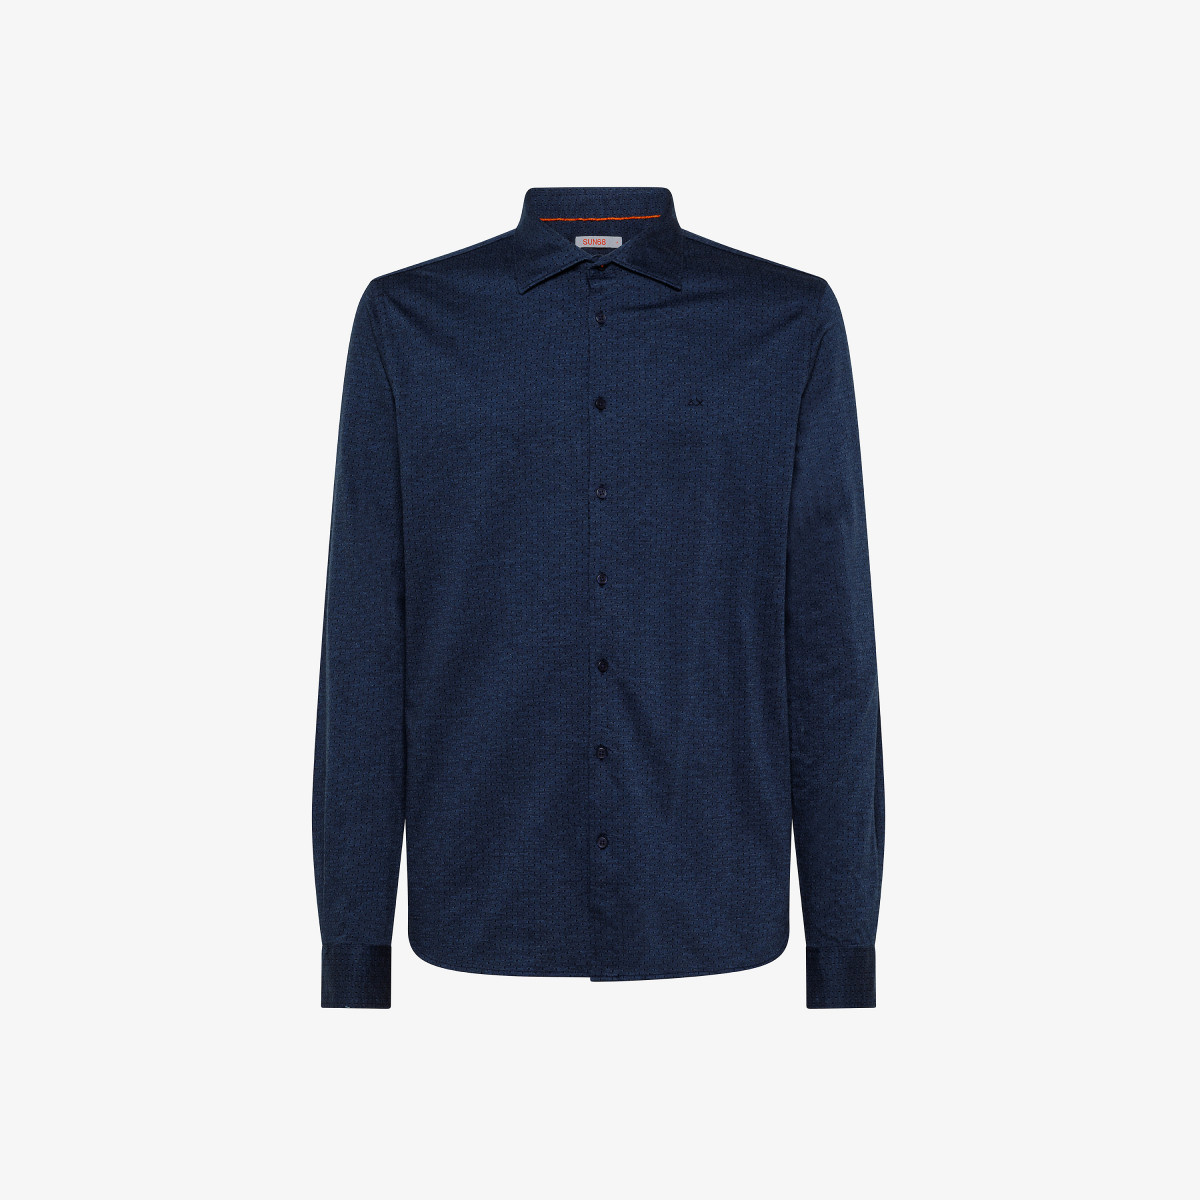 SHIRT JERSEY FANCY FRENCH COLLAR L/S NAVY SCURO